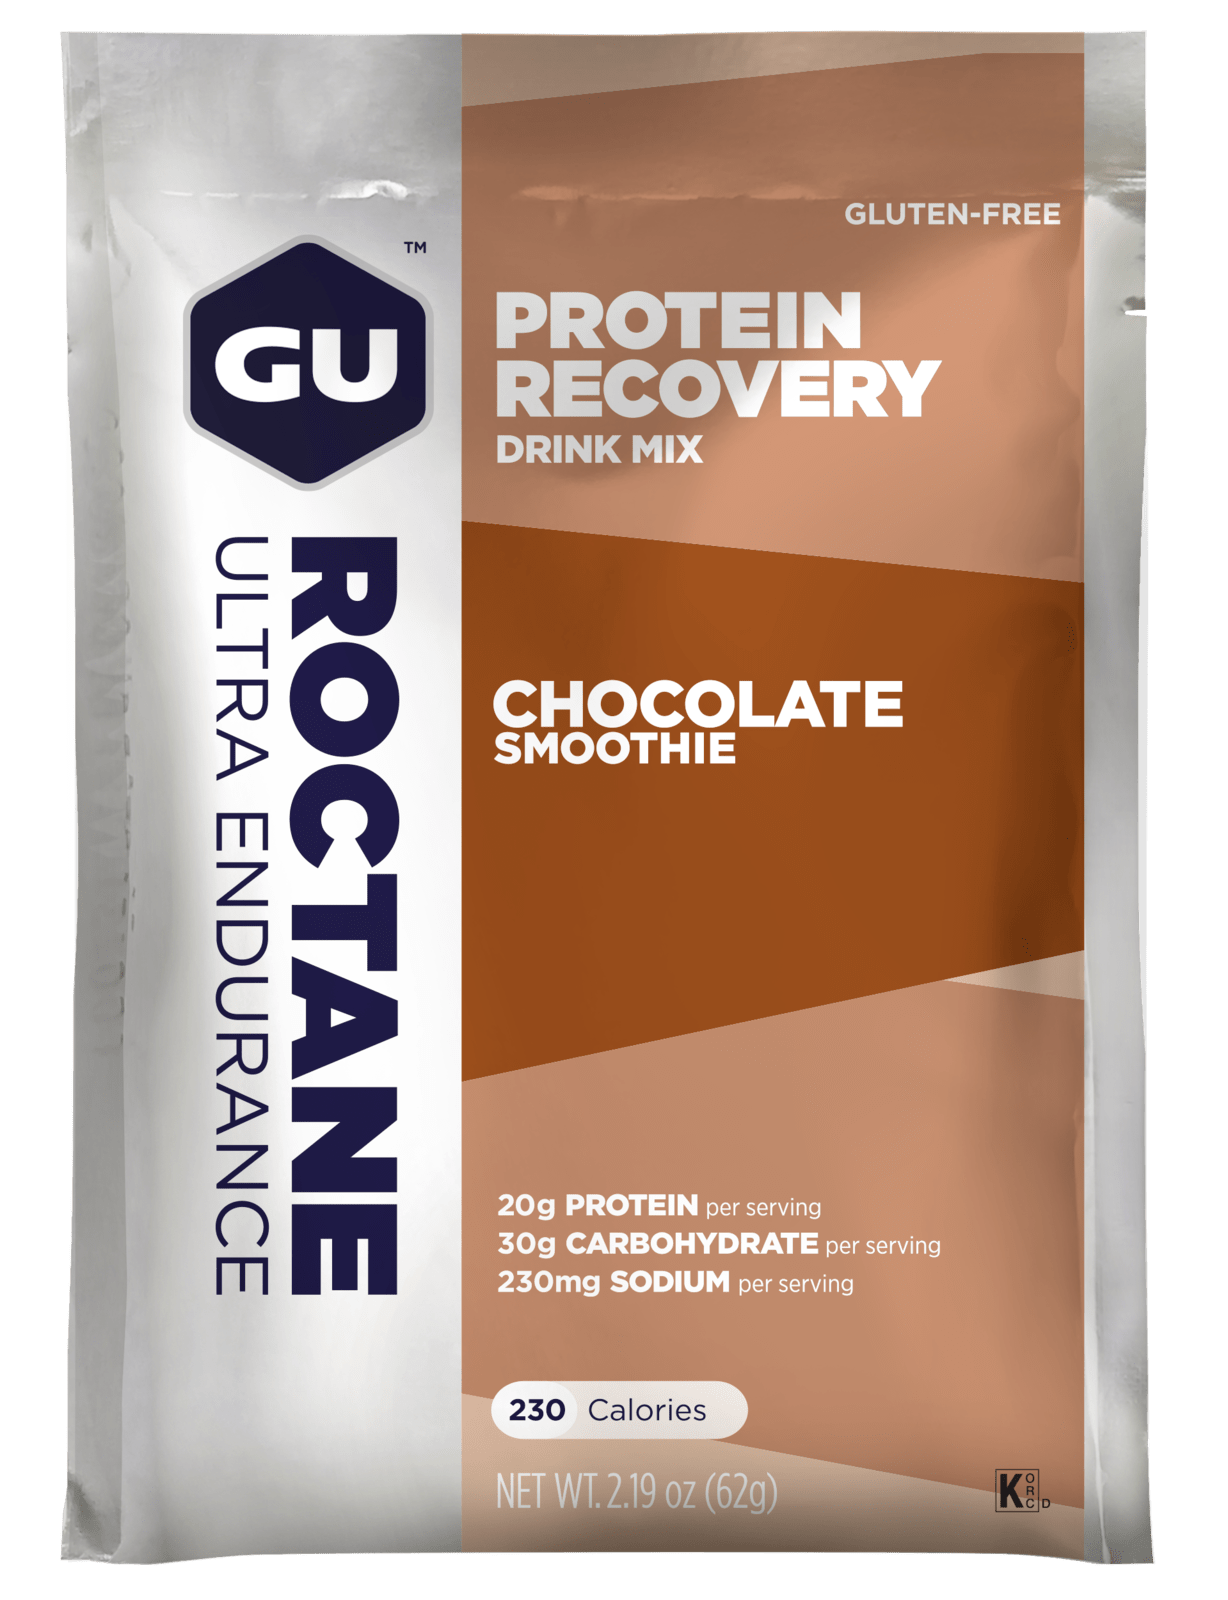 GU Energy Proteindrik Roctane Recovery Chocolate Smoothie (10 x 65g)